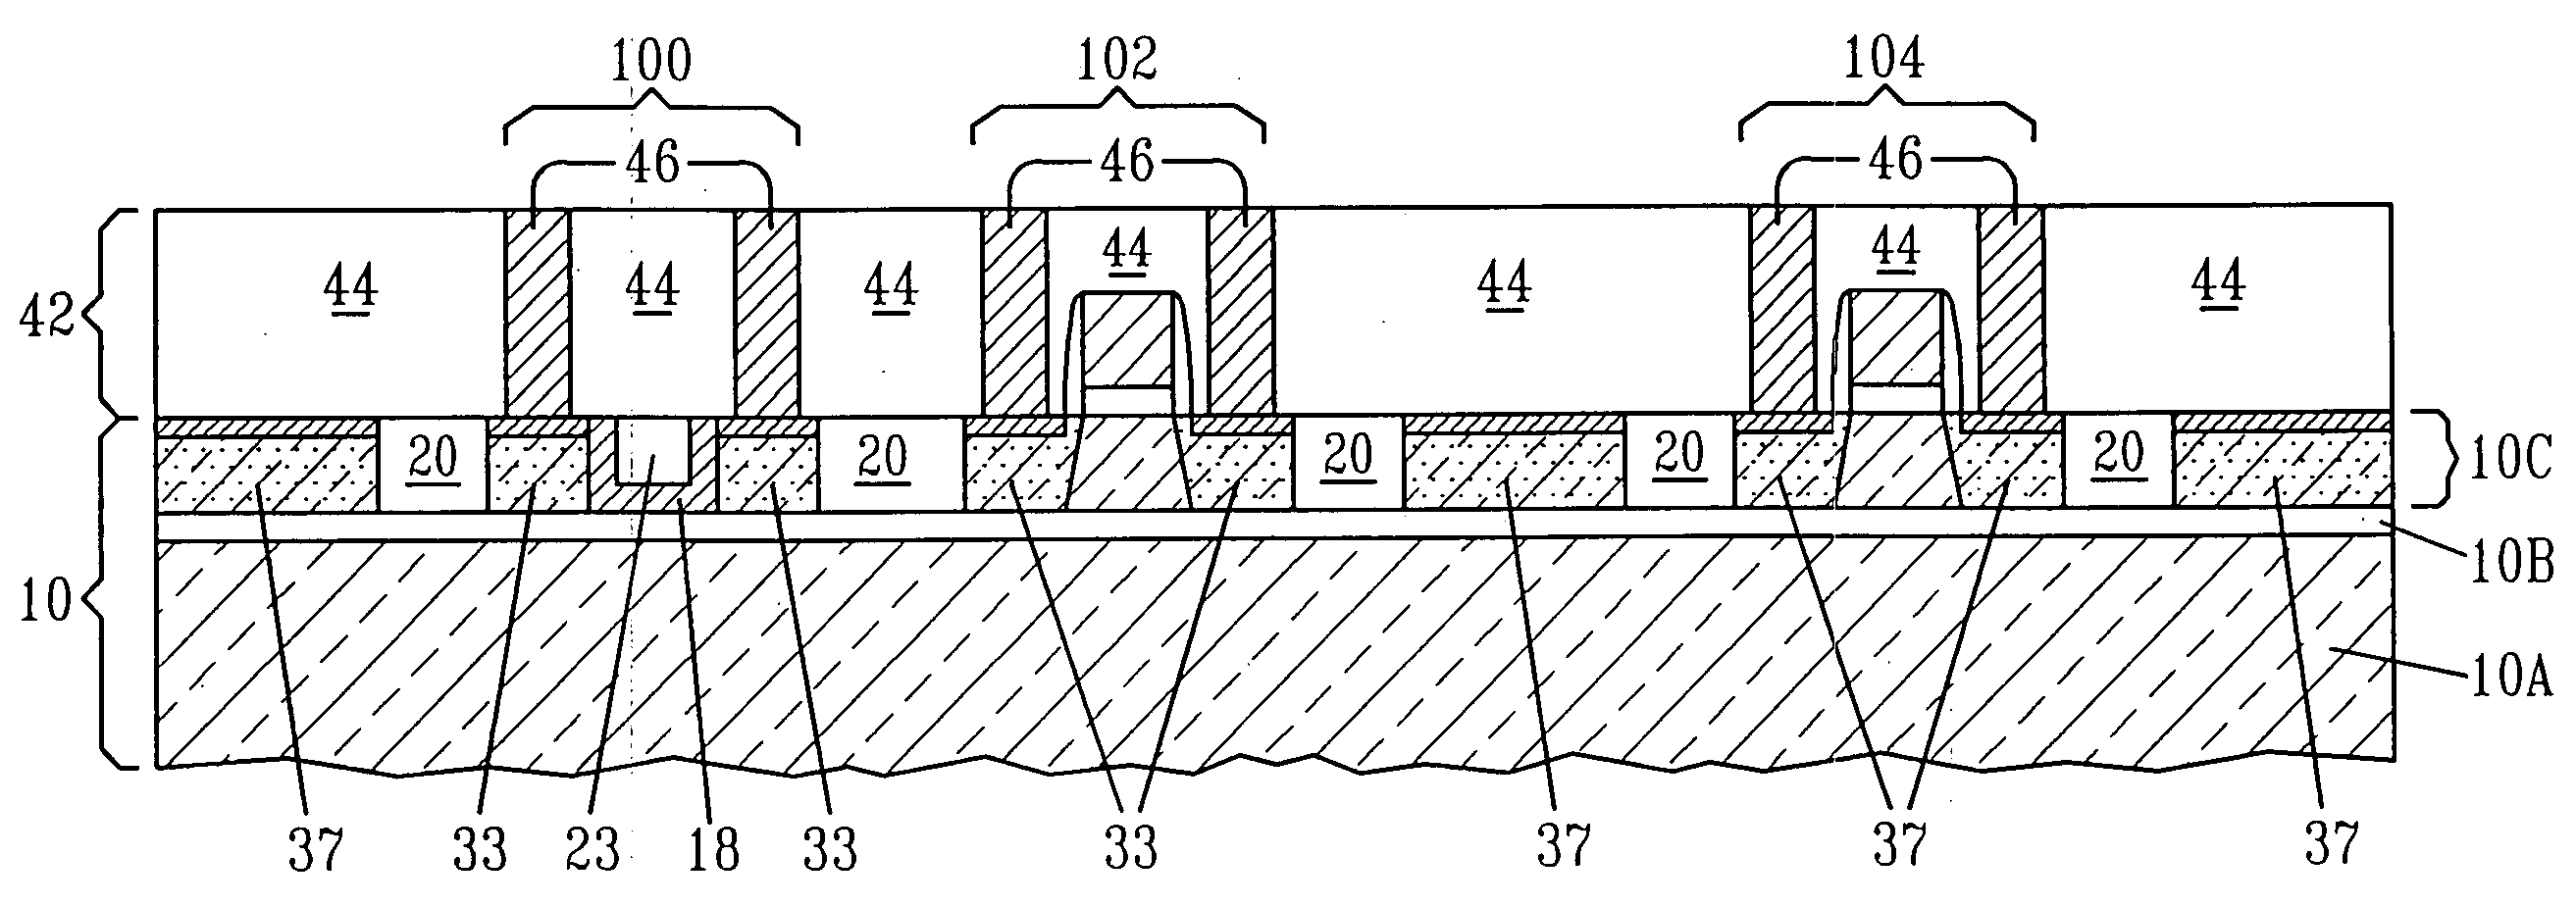 CMOS compatible shallow-trench efuse structure and method